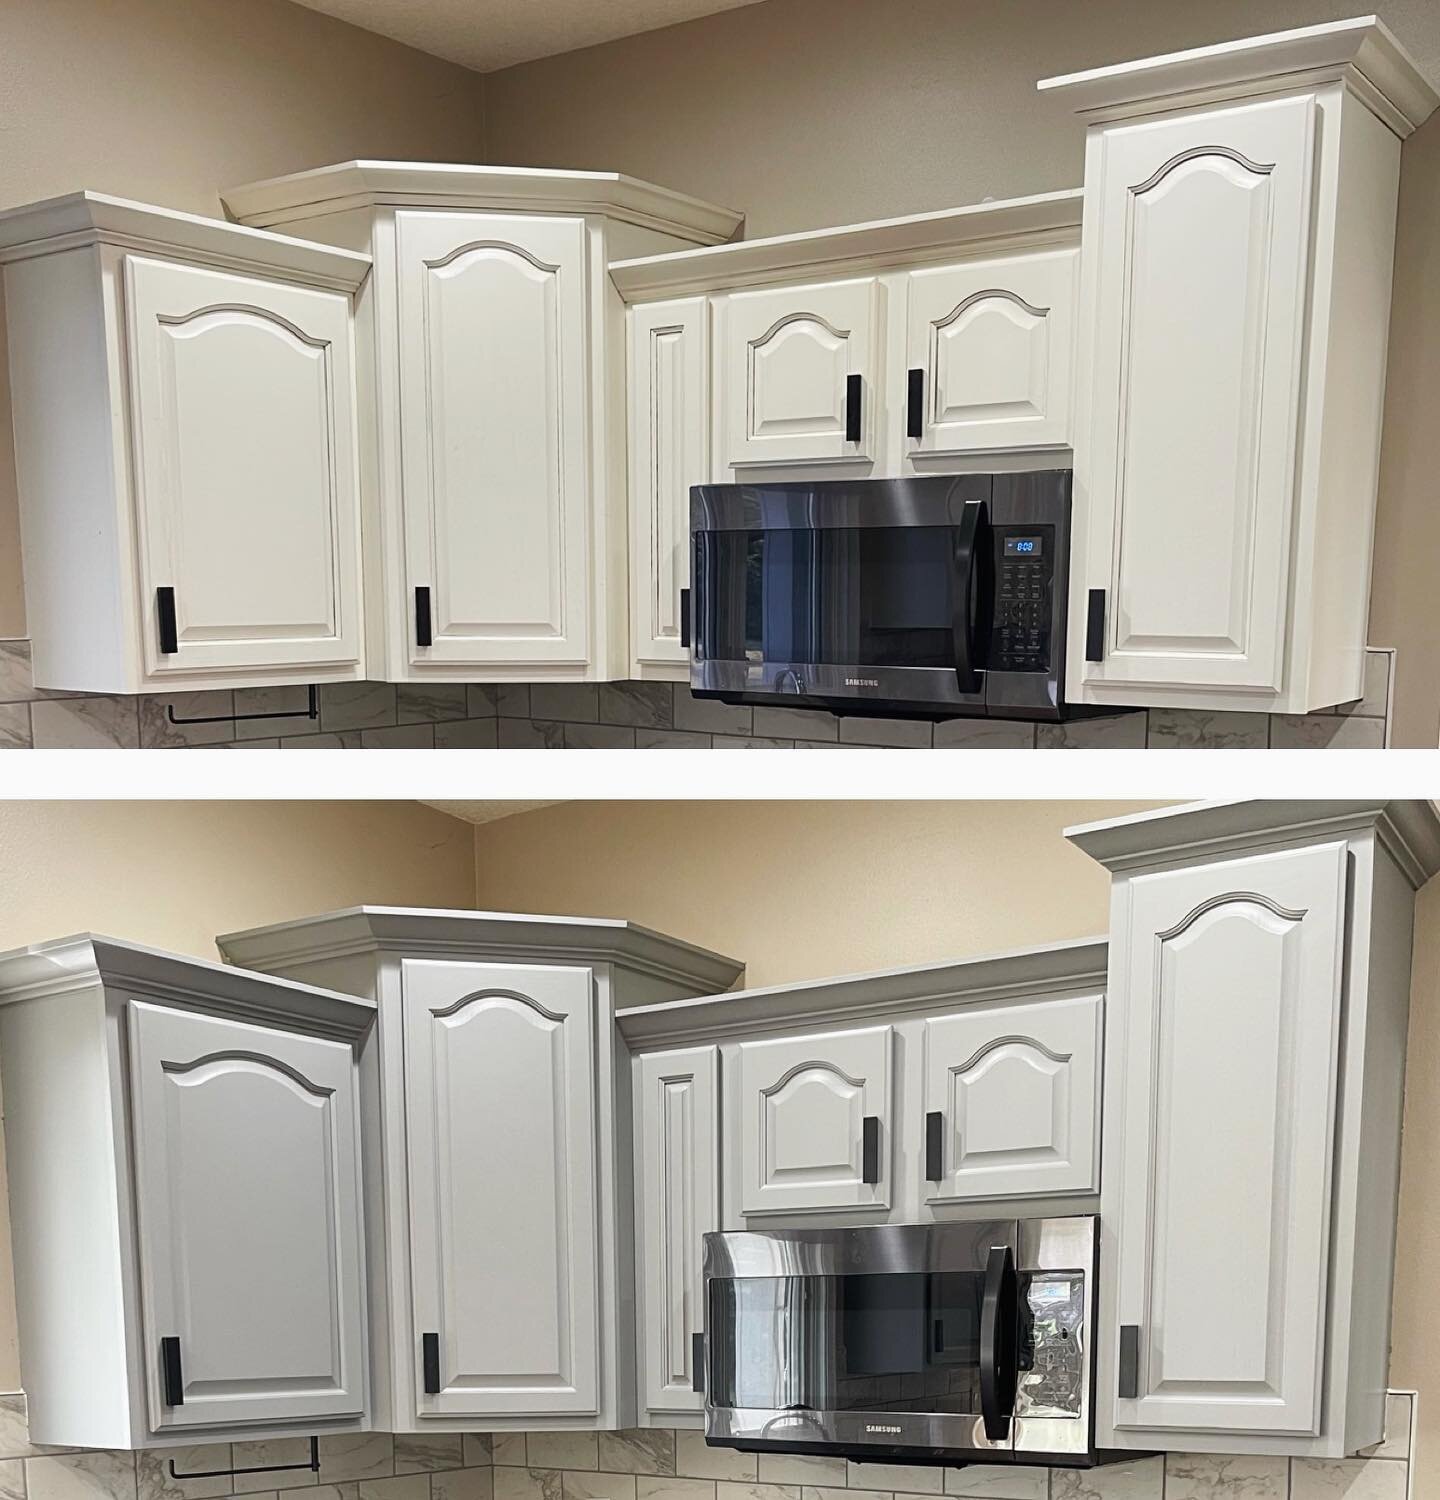 Don't toss out that old cabinet just yet! Let us work our painting magic and give it a new look. #cabinetmakeoverideas #paintingtips #homediyprojects